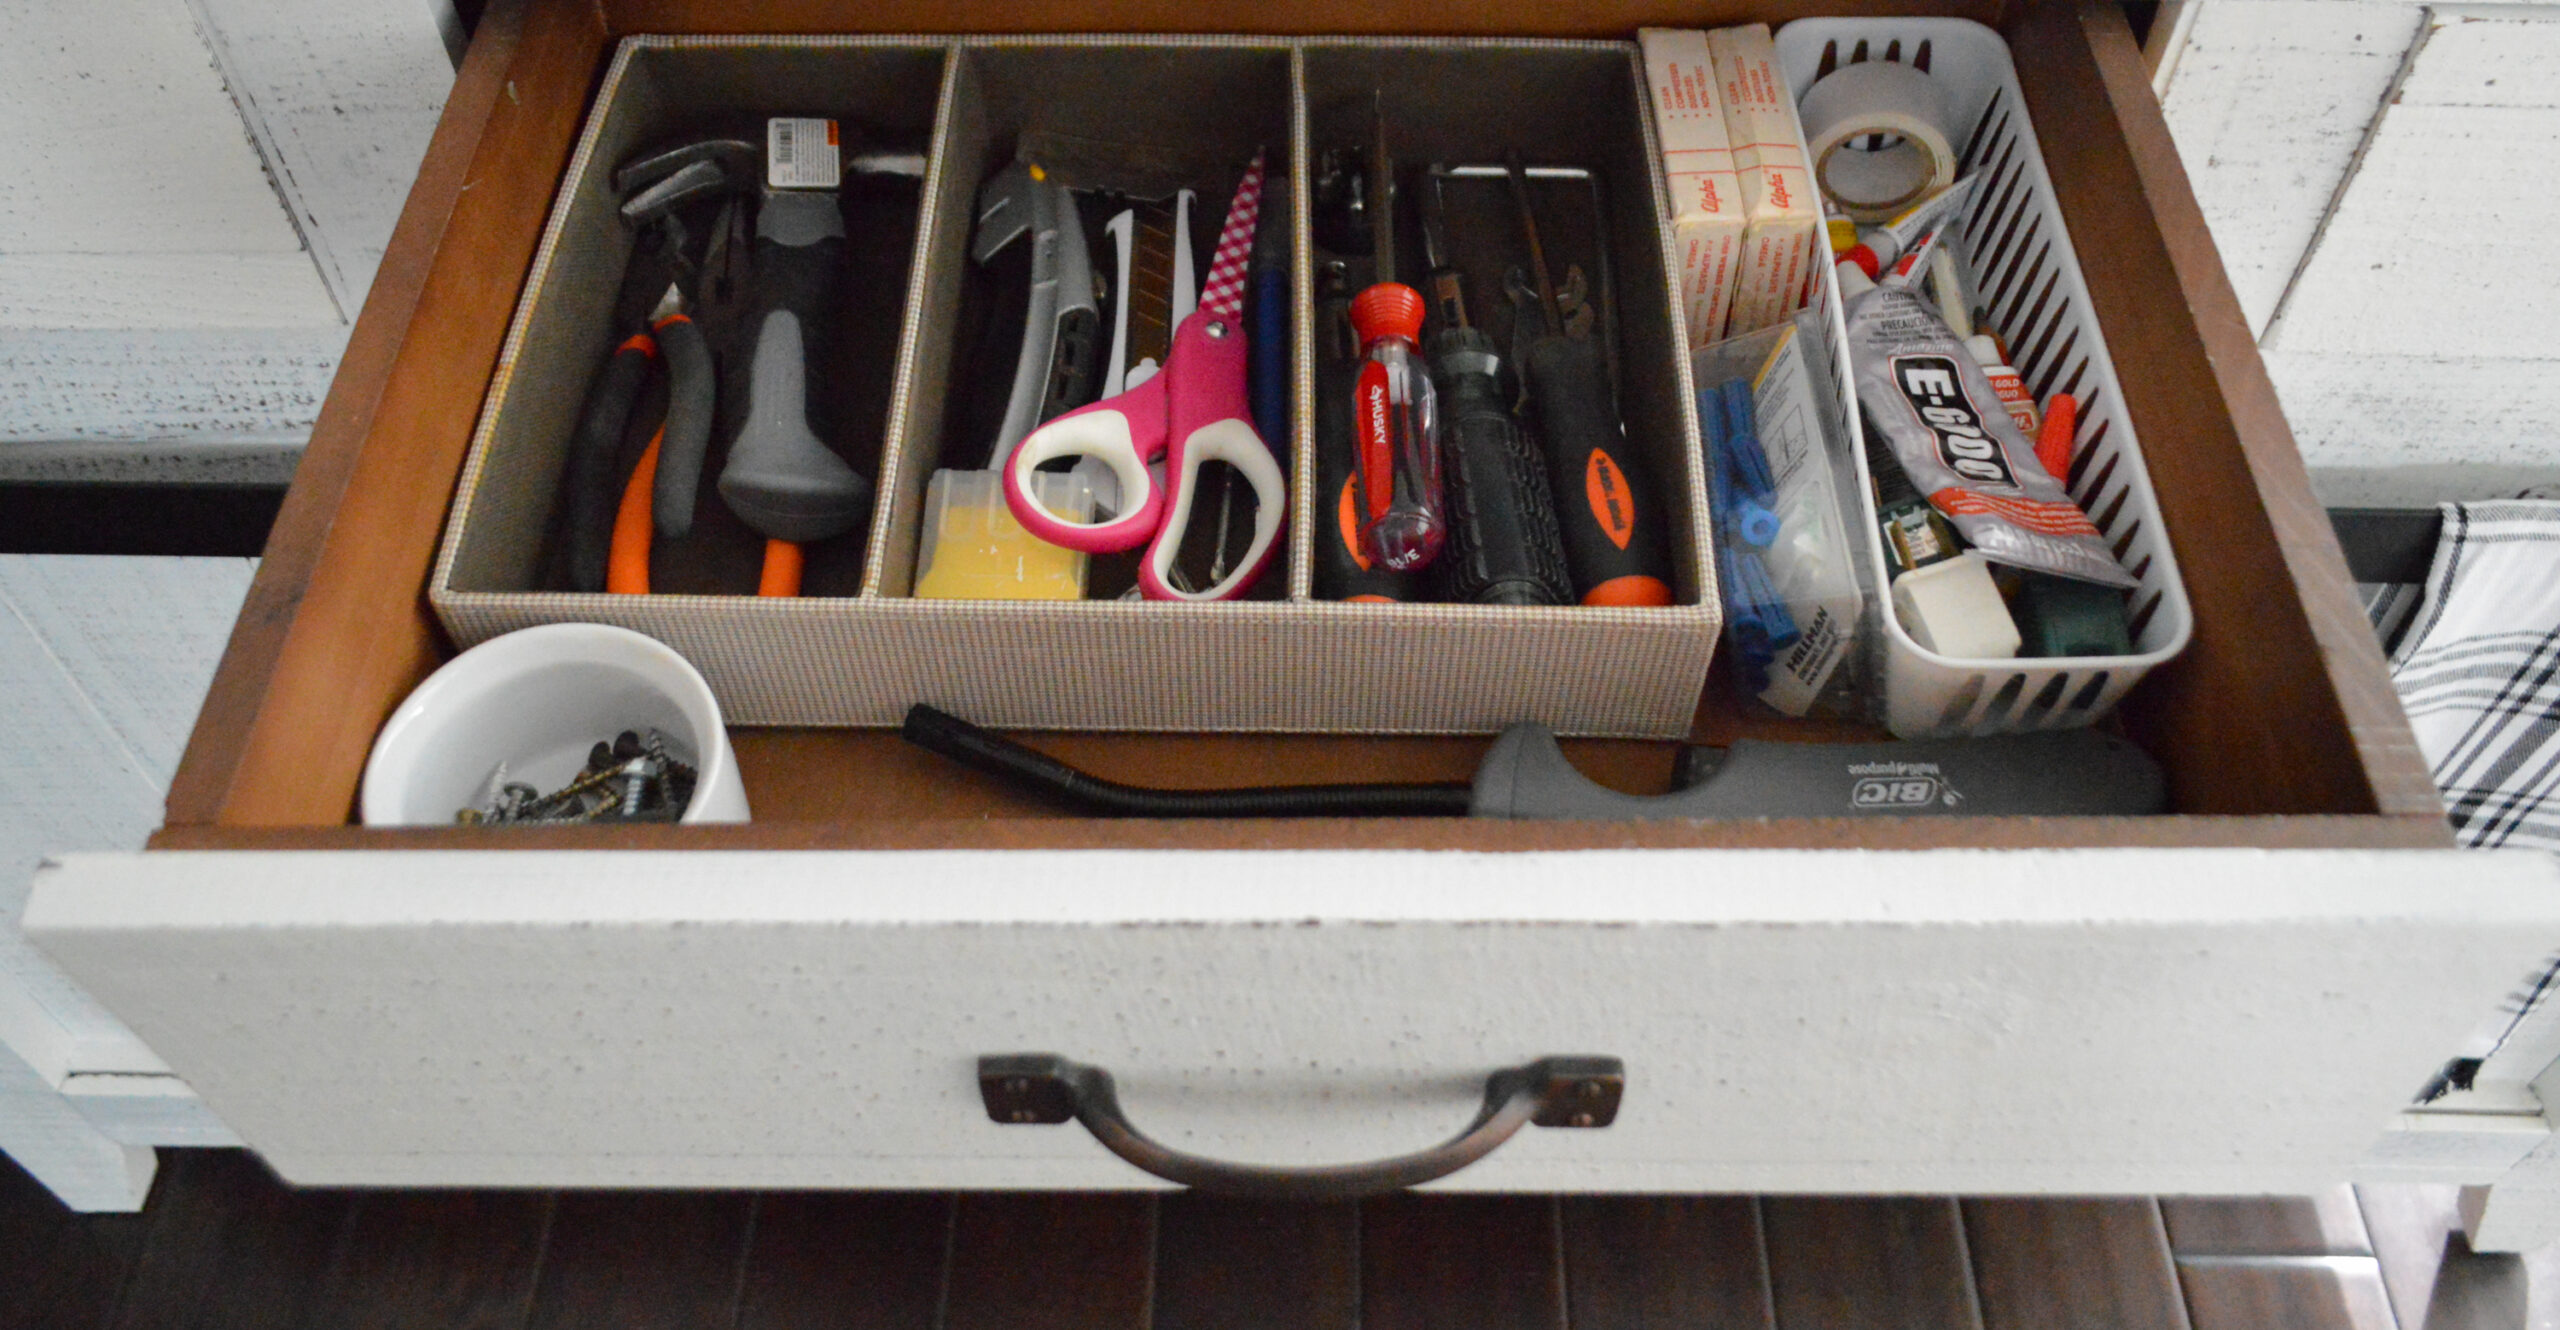 WHAT'S IN YOUR JUNK DRAWER? 5 Unexpected Items Justify My Junk